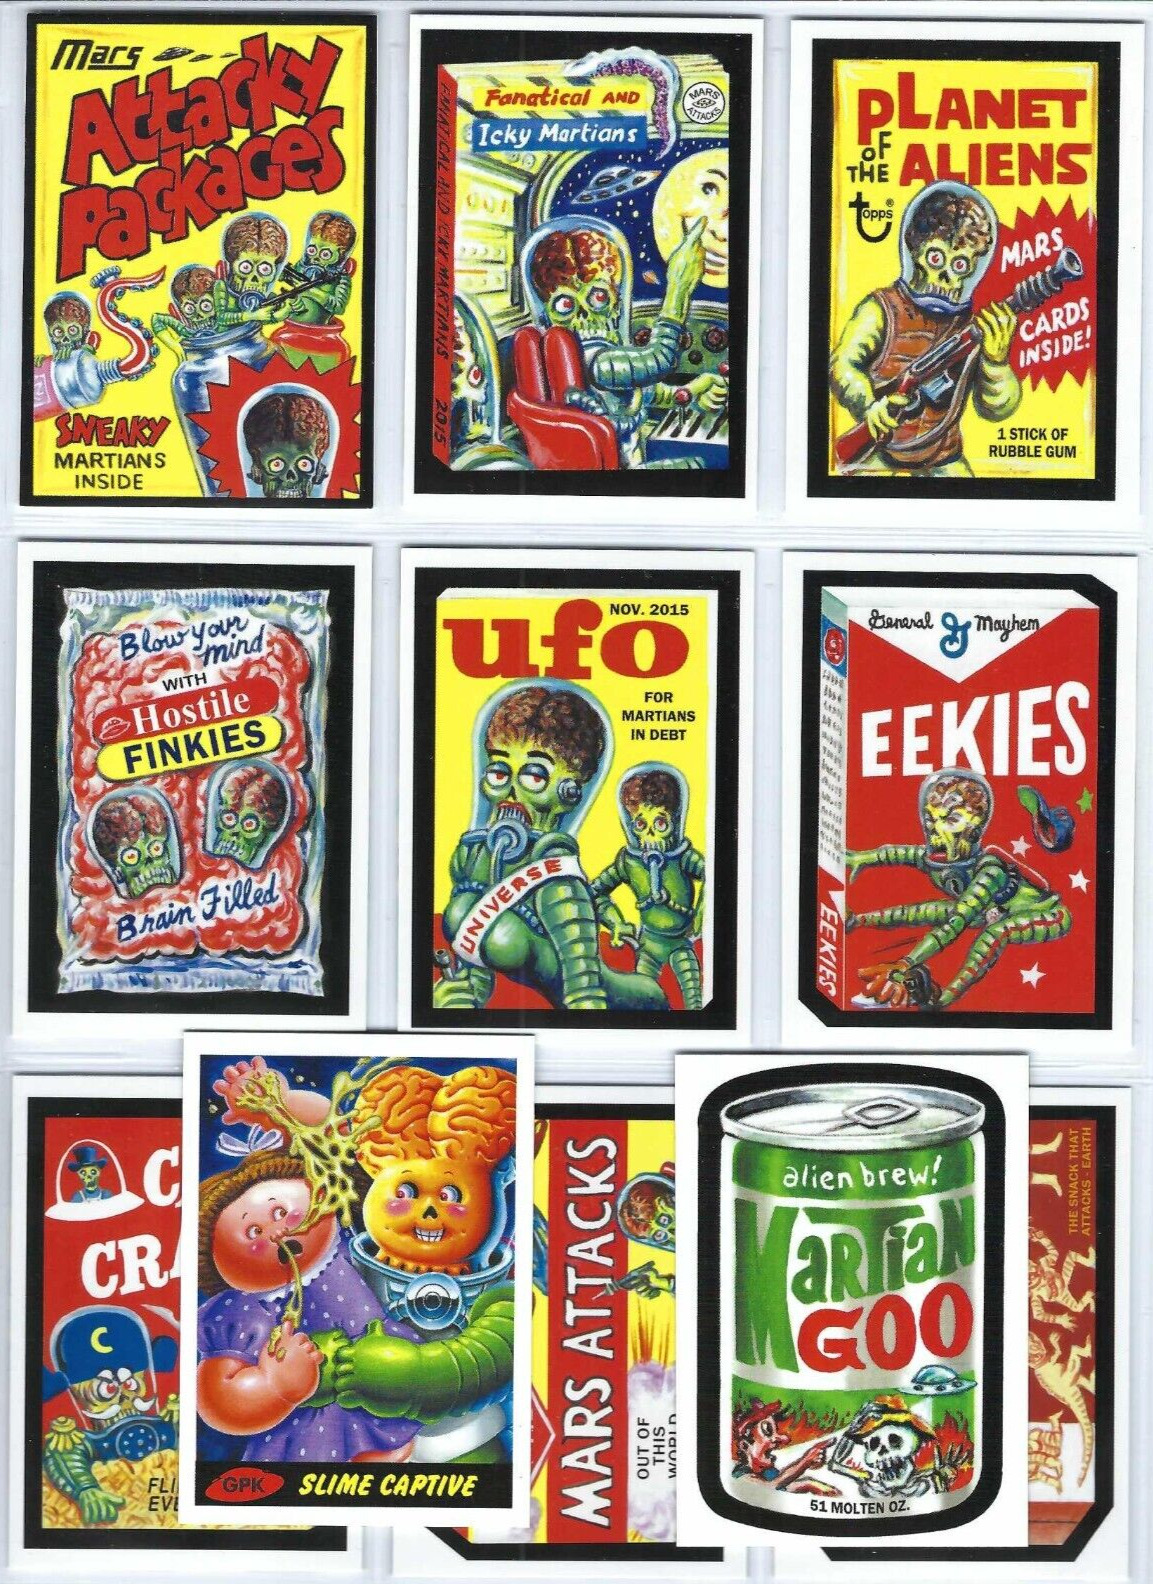 MARS ATTACKS OCCUPATION ATTACKY PACKAGES 2015 COMPLETE SET OF 10 + GPK CARD